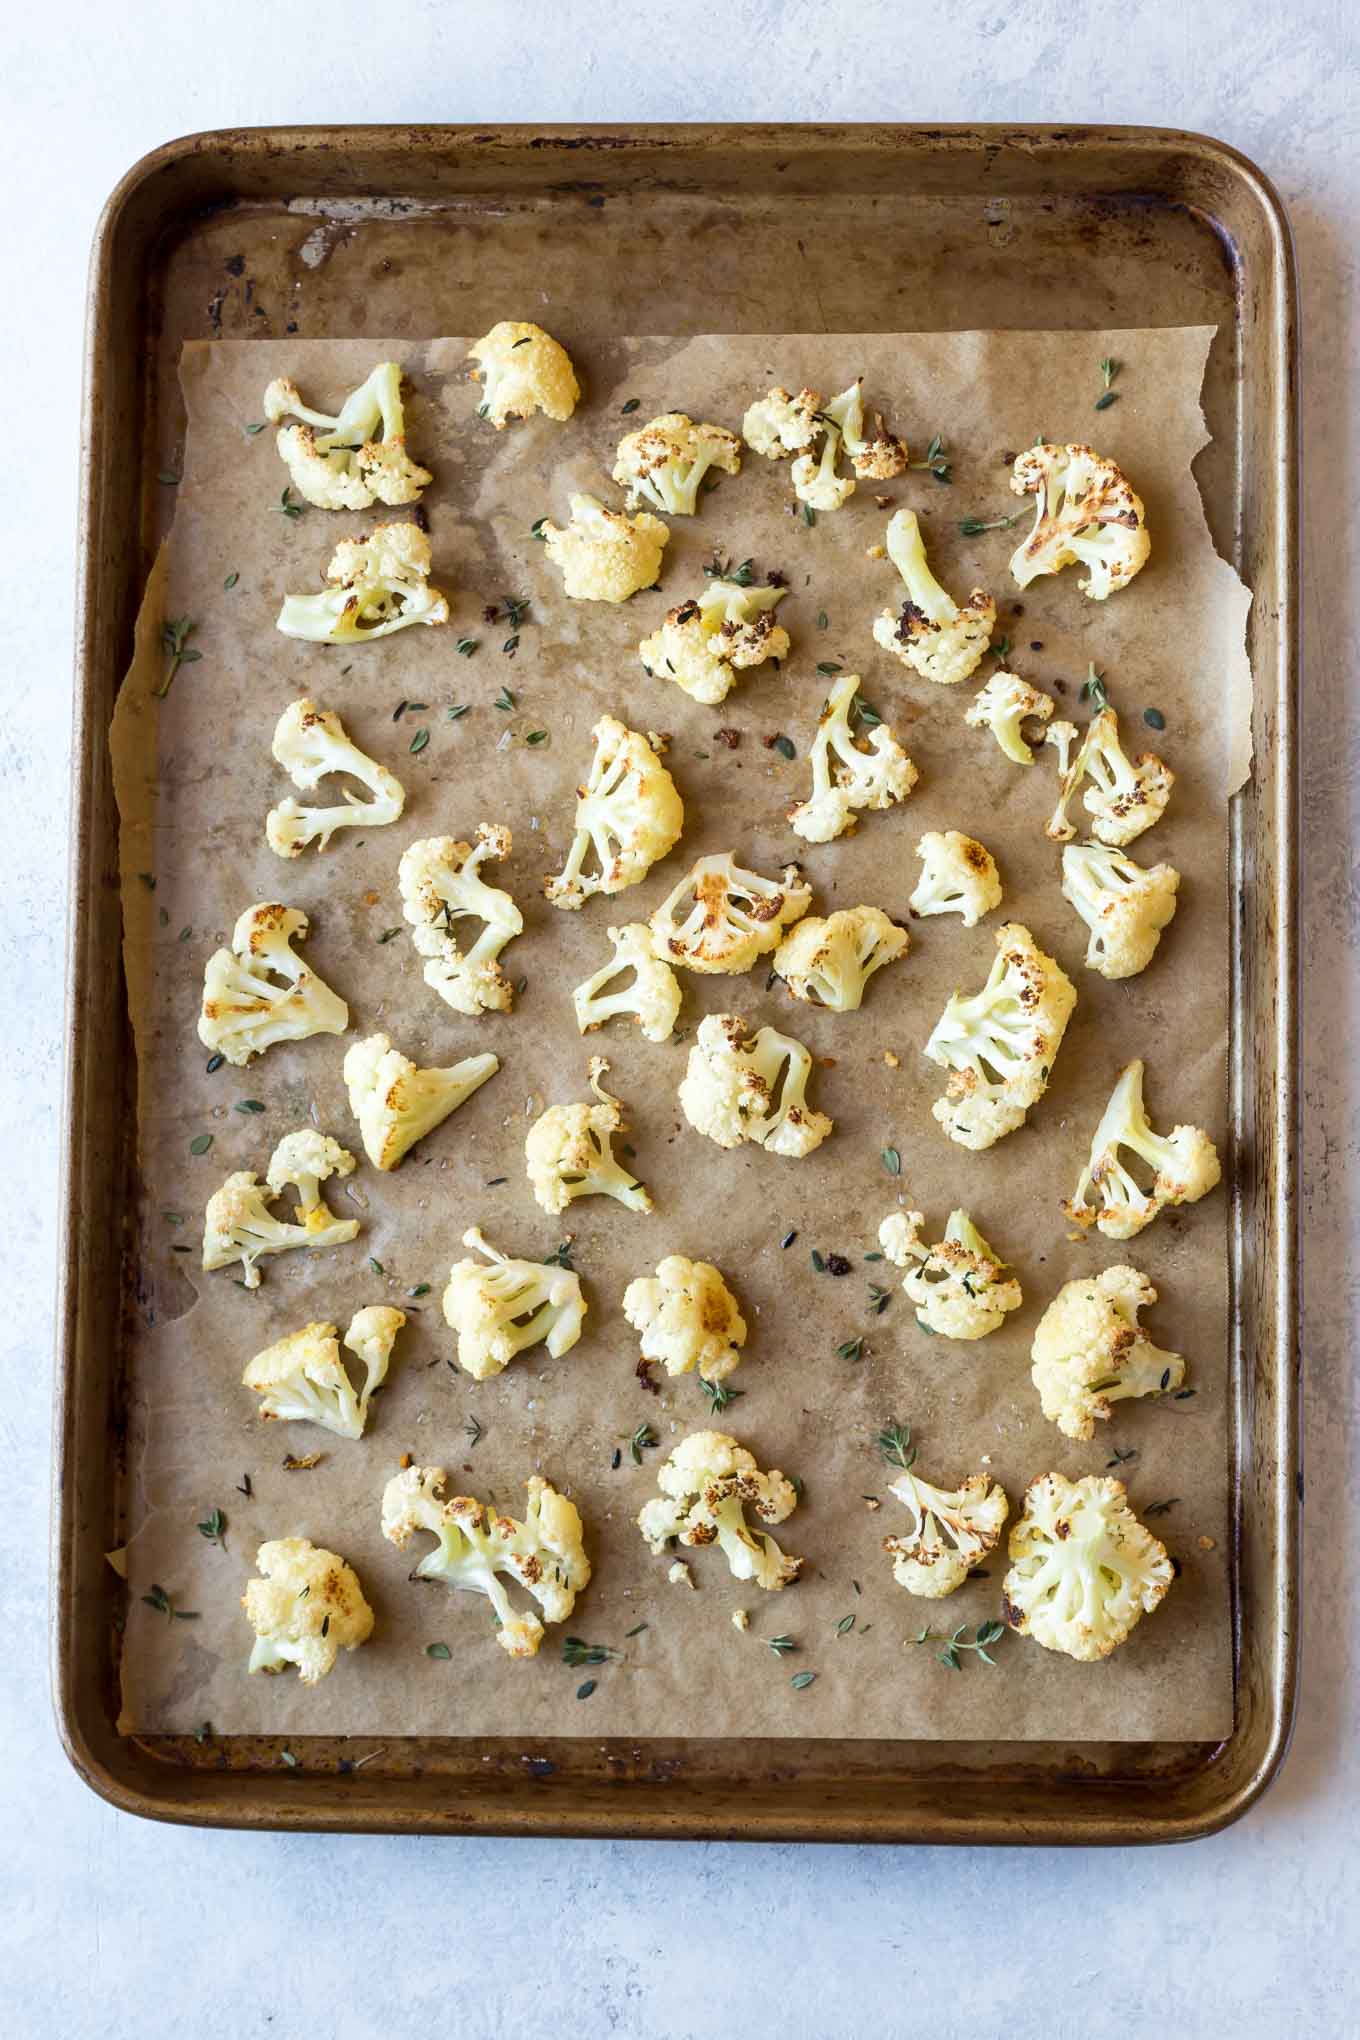 Paleo Roasted Cauliflower with Lemon,Thyme, and Garlic, make it easily in the oven! This recipe is also Whole30, vegan and low carb.